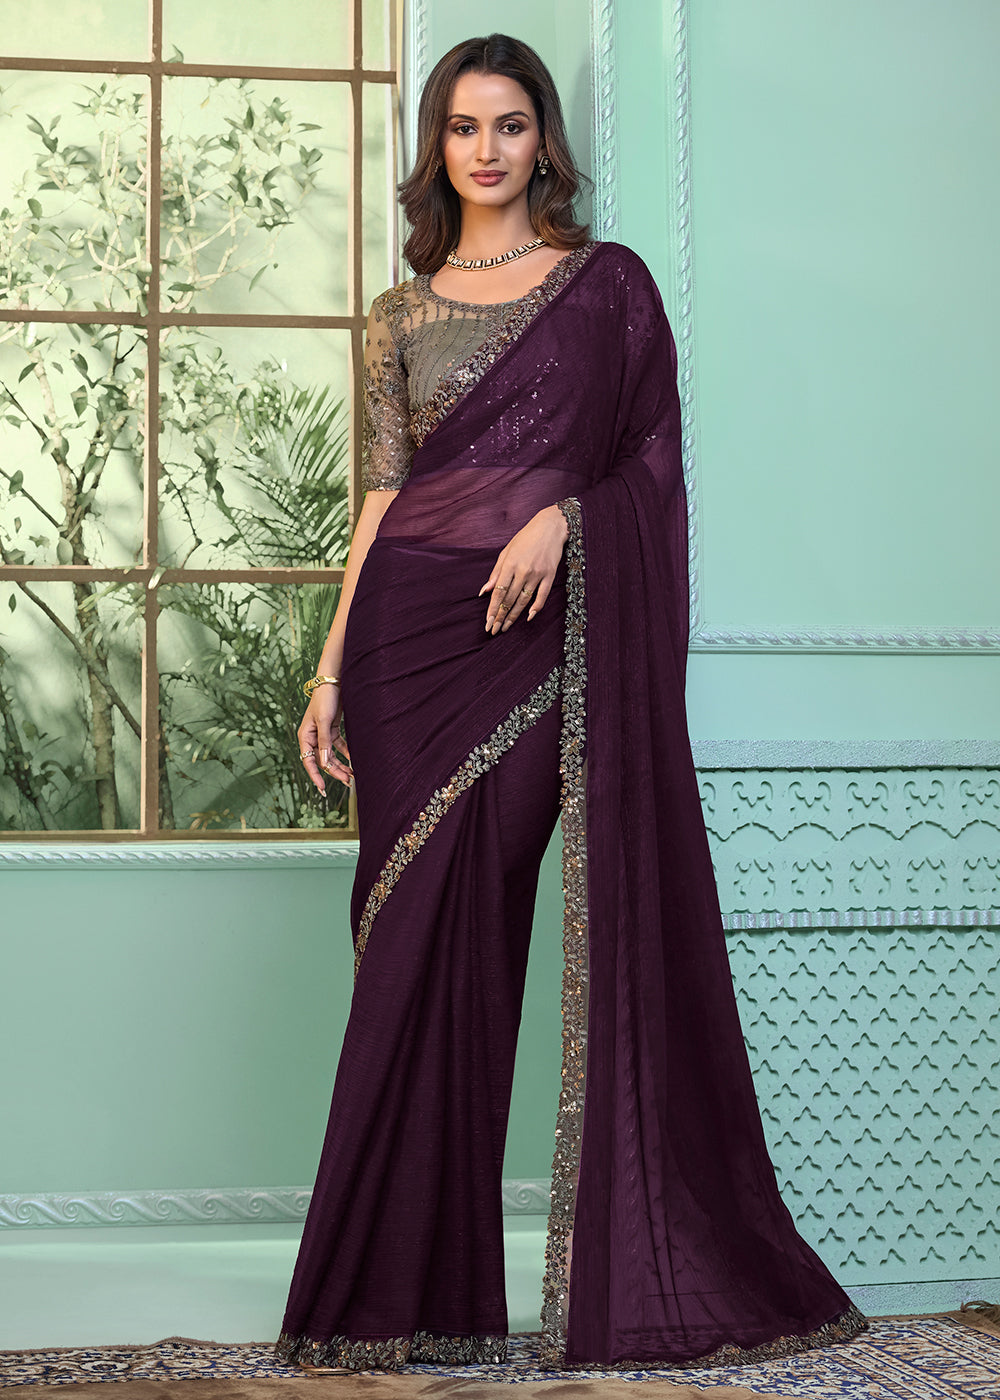 Buy Now Lovely Purple Chiffon Embroidered Wedding Party Wear Saree Online in USA, UK, Canada & Worldwide at Empress Clothing.